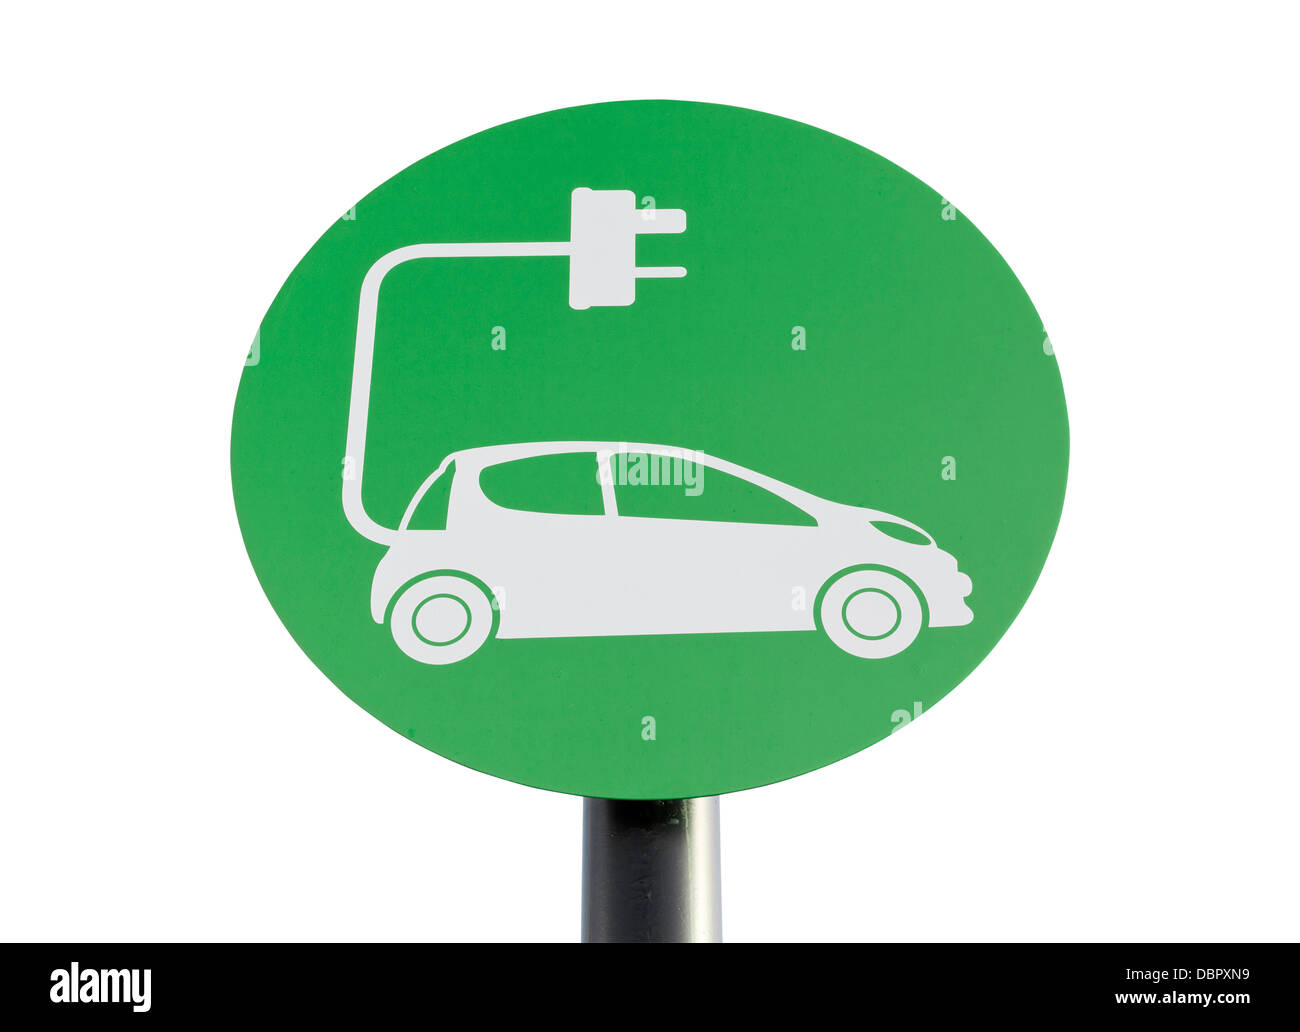 Green sign indicating a charging point for electric vehicles, isolated on white with clipping path. Stock Photo